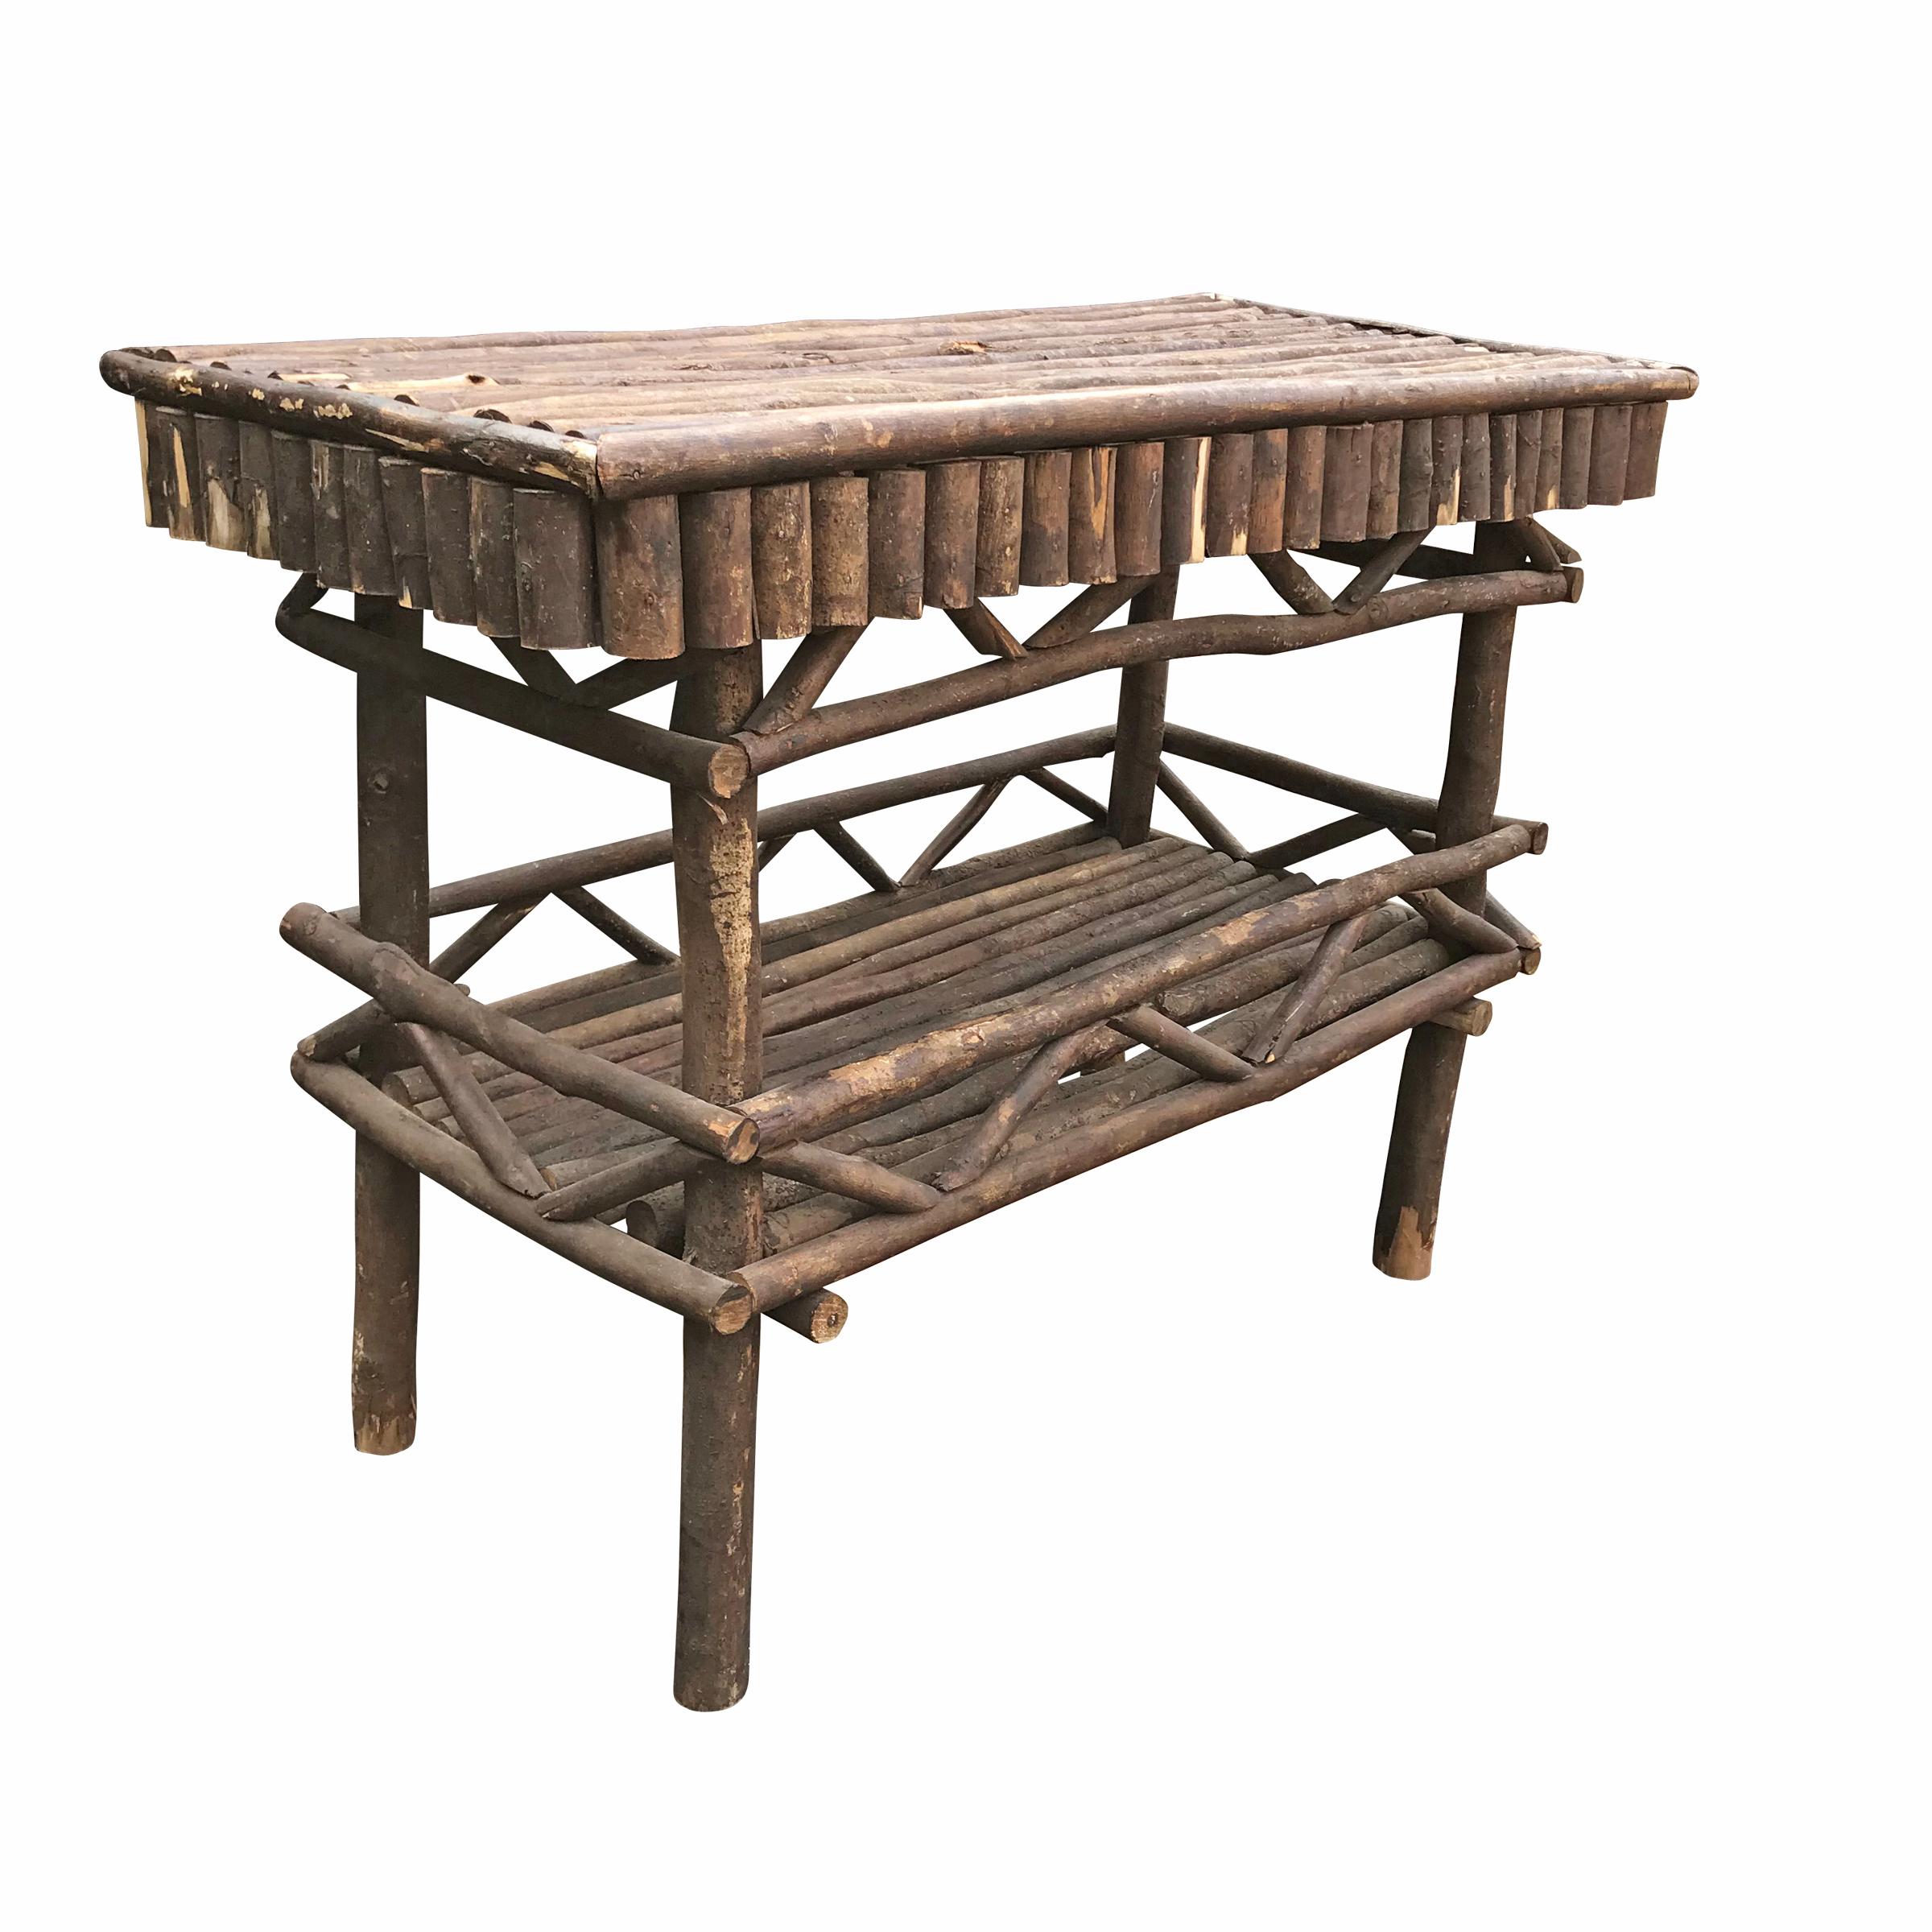 A whimsical early 20th century American Adirondack style console table composed of cut branches arranged side by side and on angles to create the apron and lower shelf. The Adirondack style drew upon Swiss chalet architecture and was made popular by